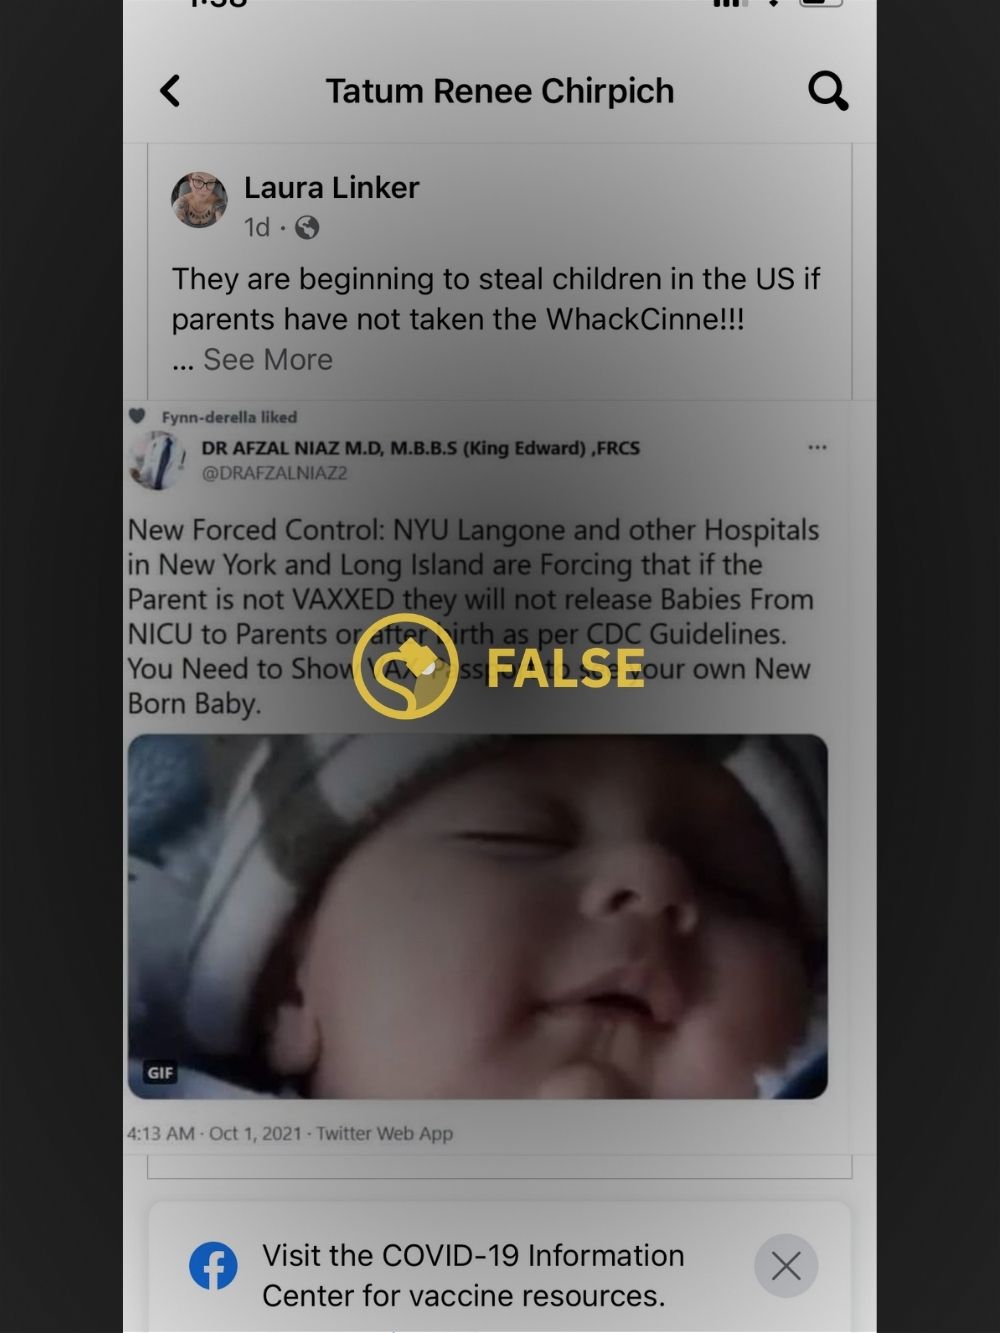 New York hospitals not allowing unvaccinated parents to take newborn babies home?